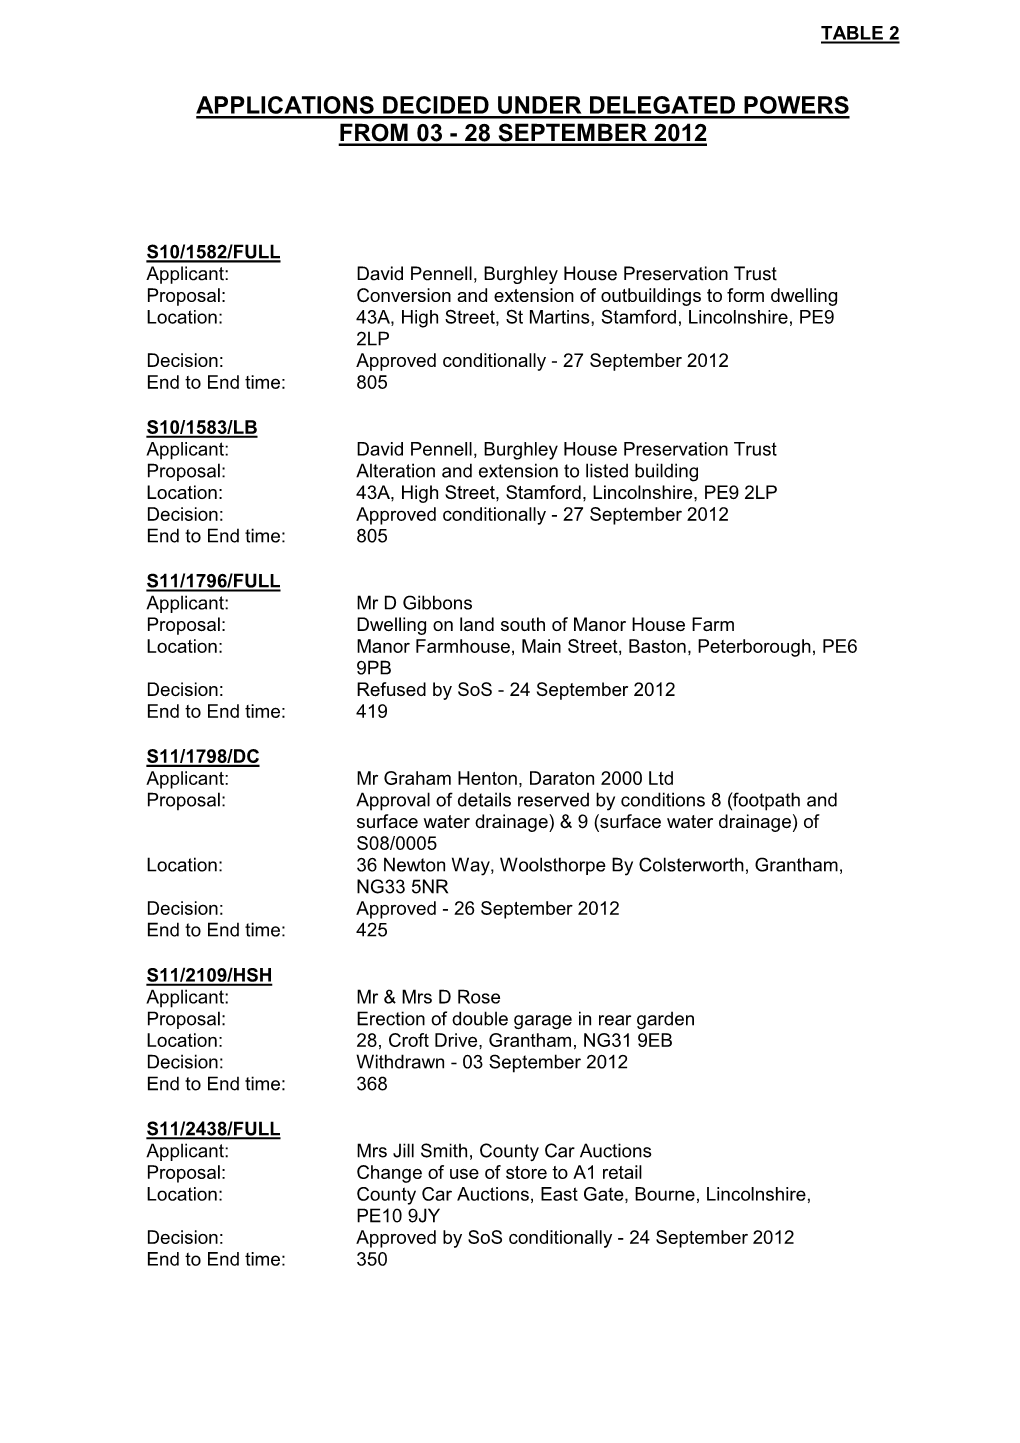 Applications Decided Under Delegated Powers from 03 - 28 September 2012